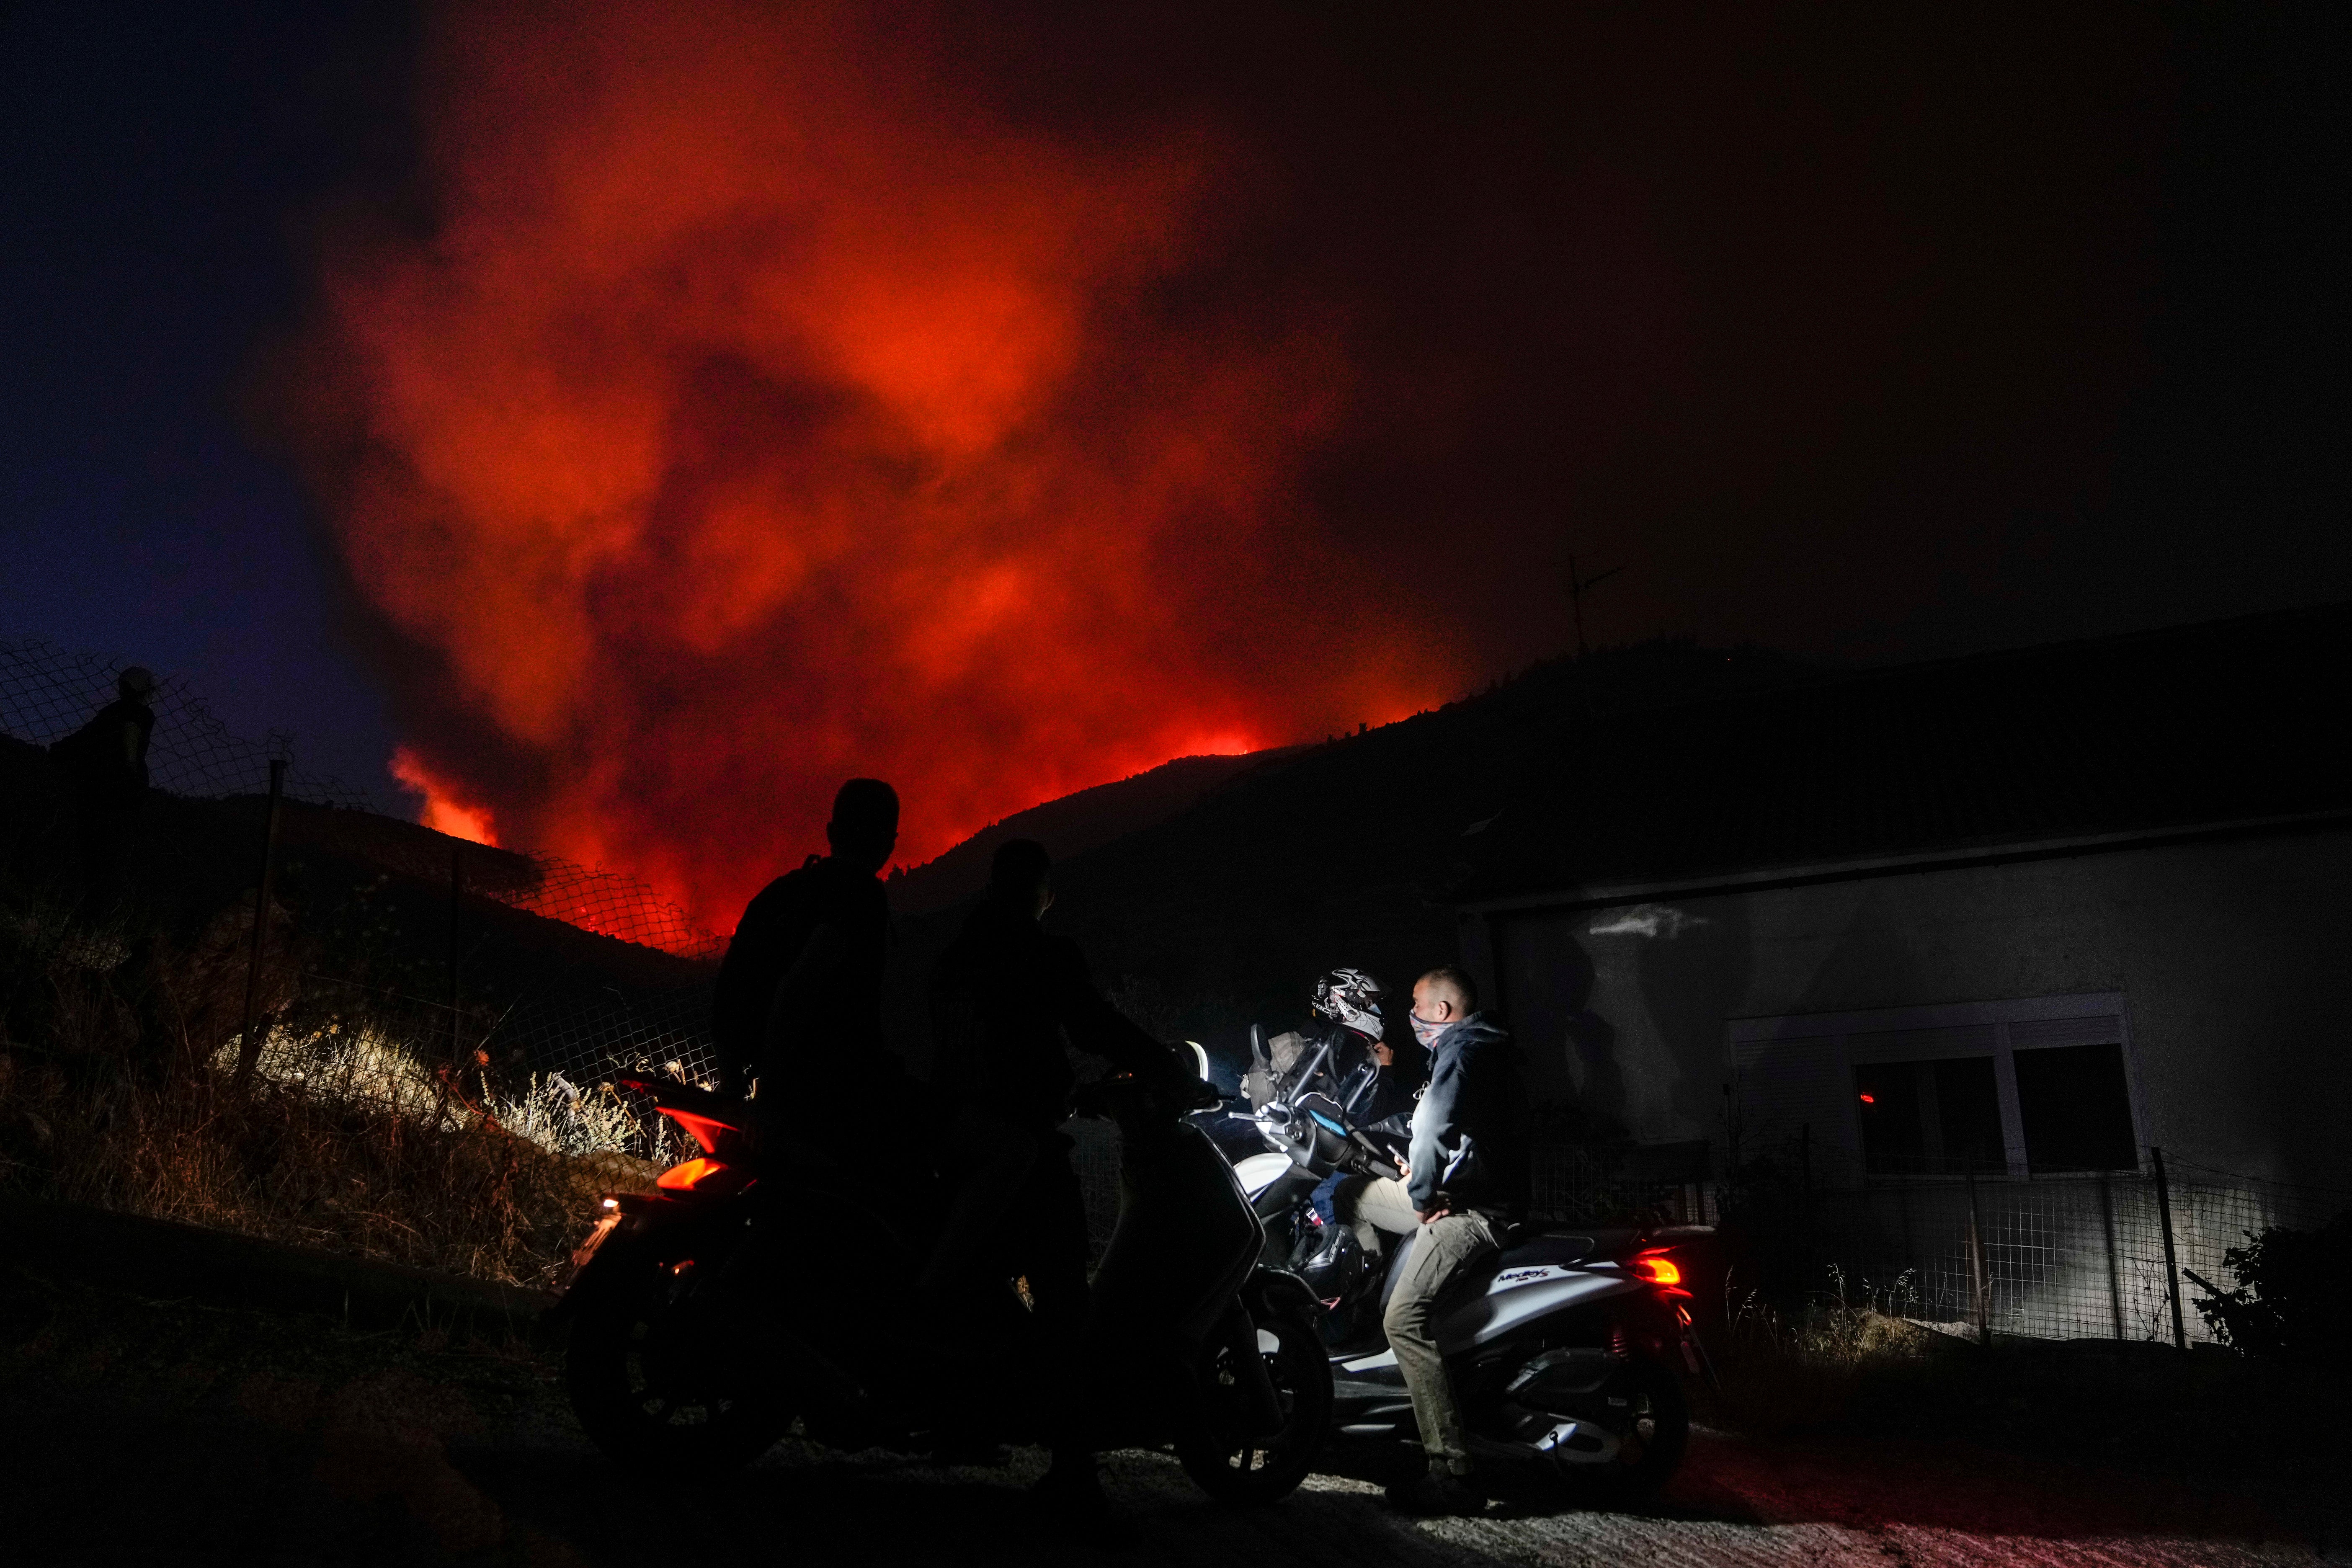 Men on motorcycles watch a fire at Penteli, Greece, on Tuesday, July 19, 2022. (Photo: Thanassis Stavrakis, AP)